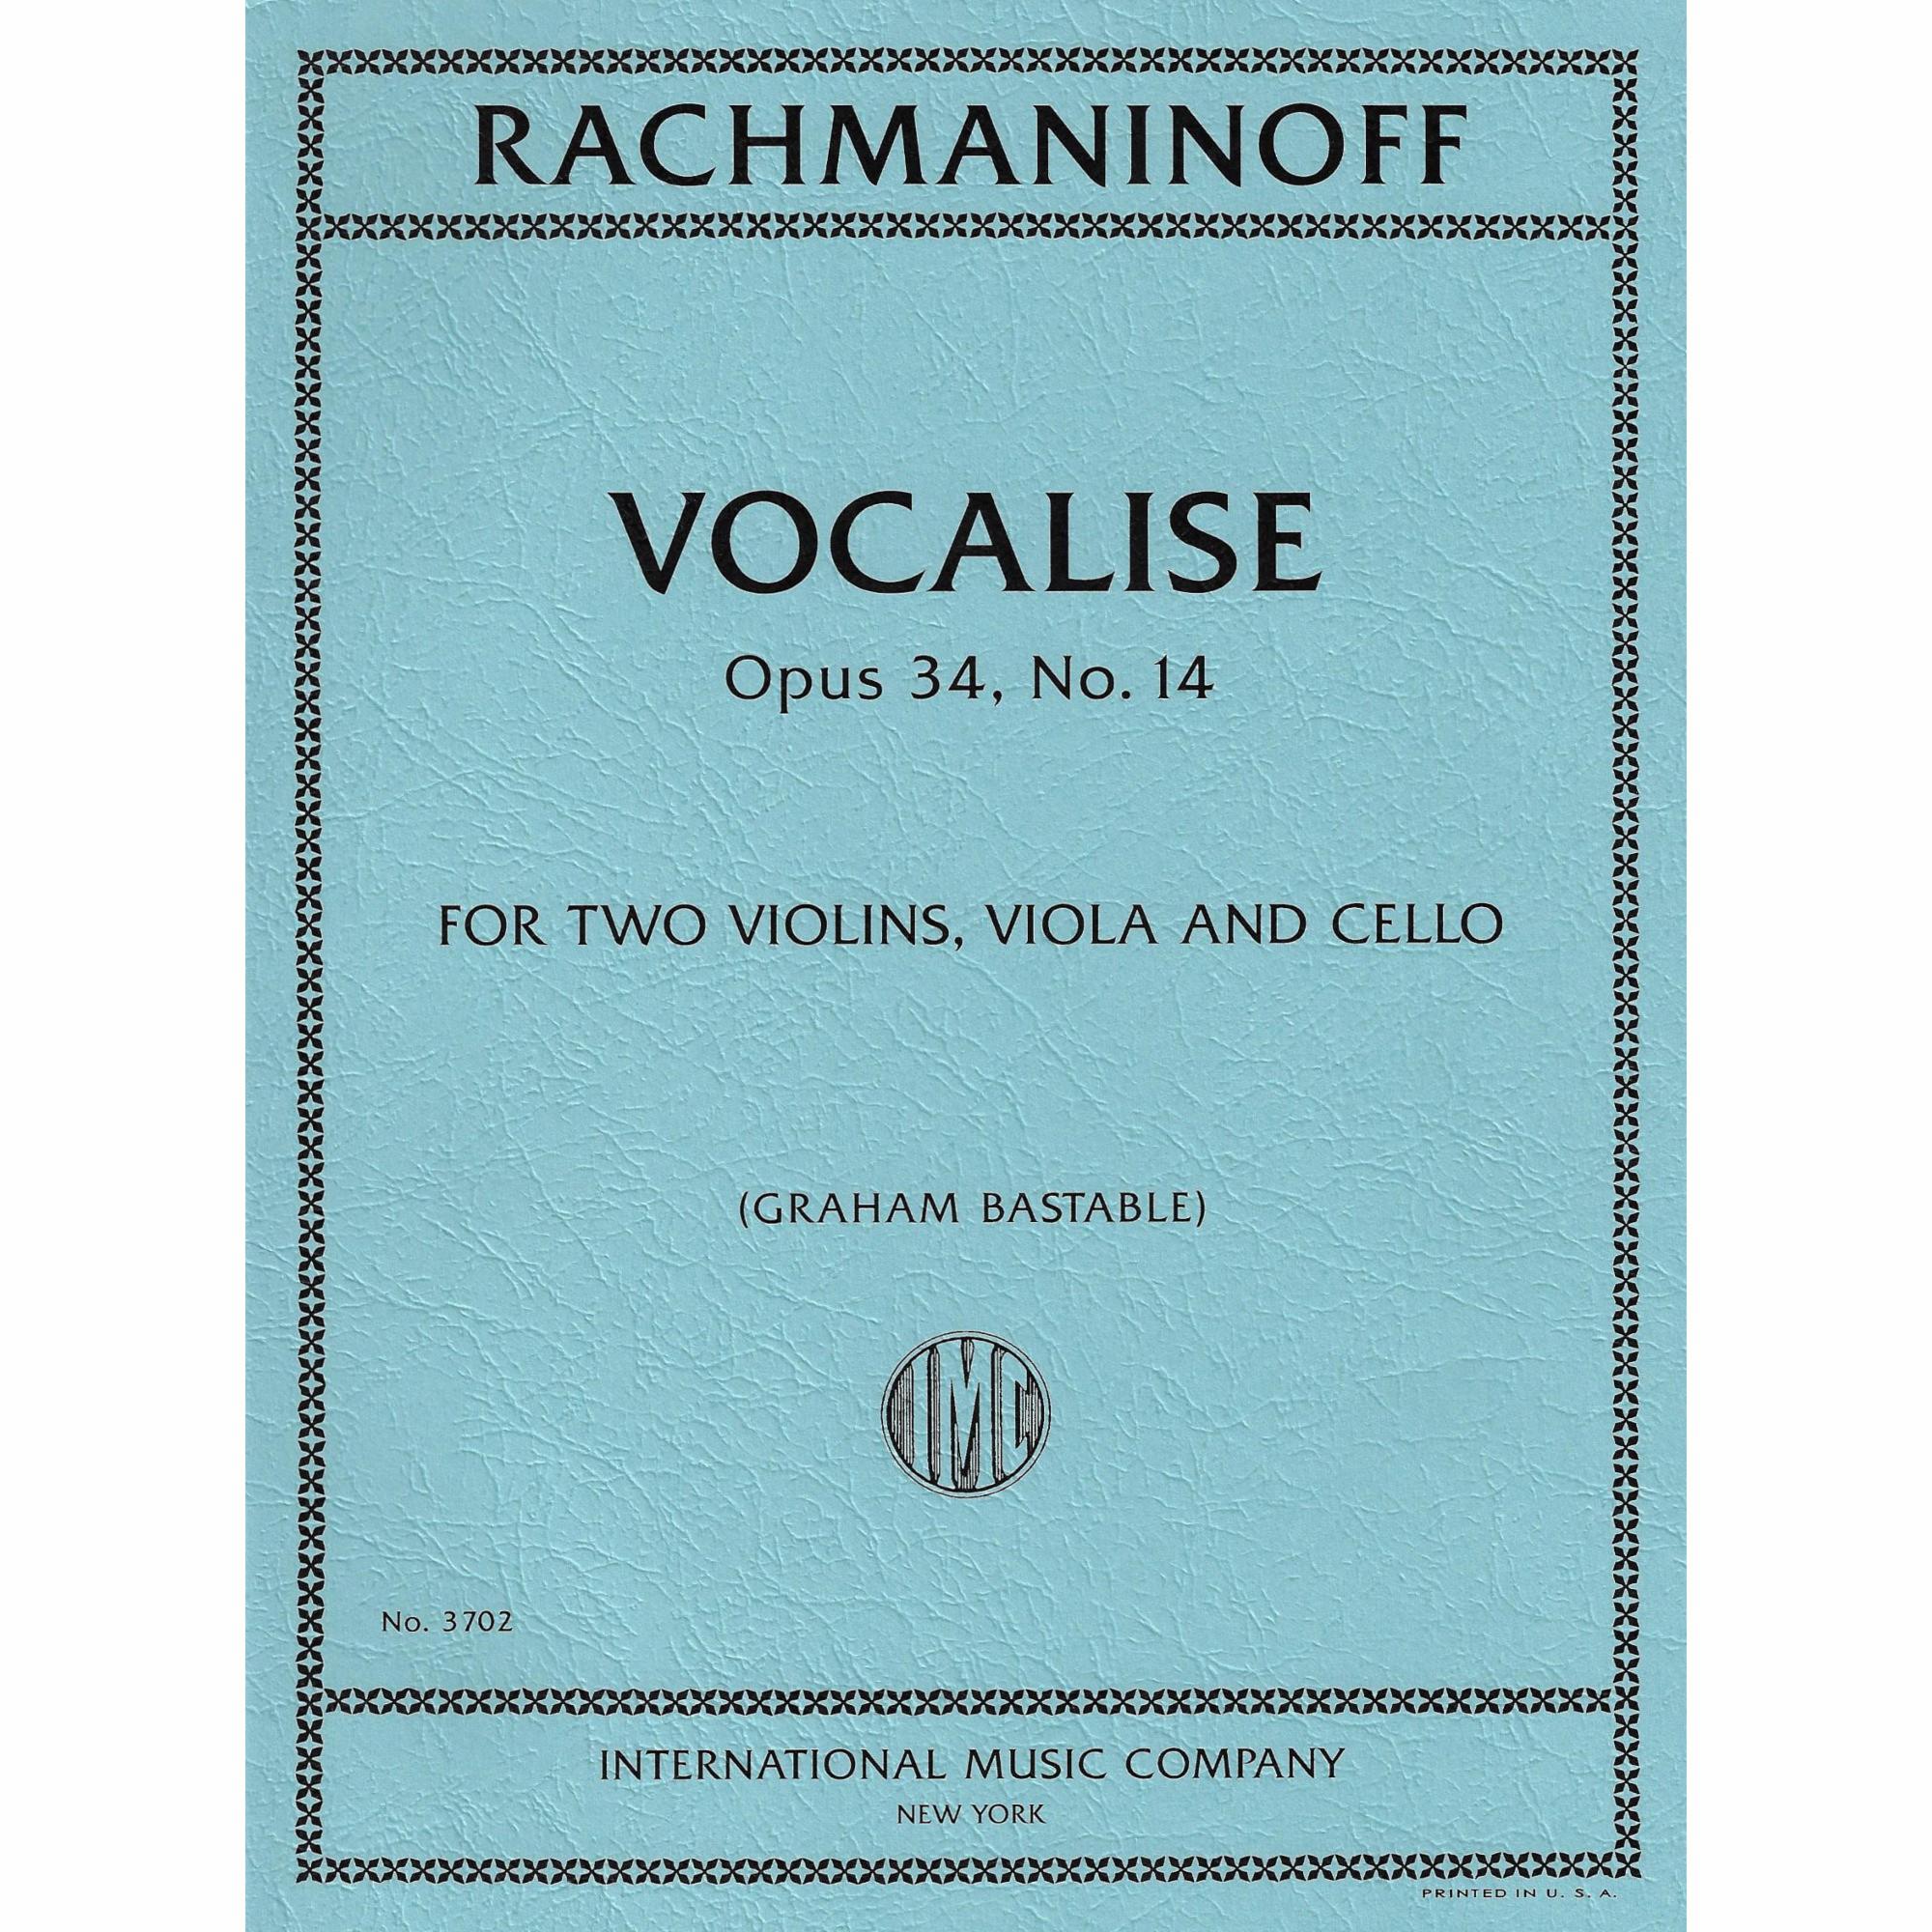 Rachmaninoff -- Vocalise, Op. 34, No. 14 for String Quartet